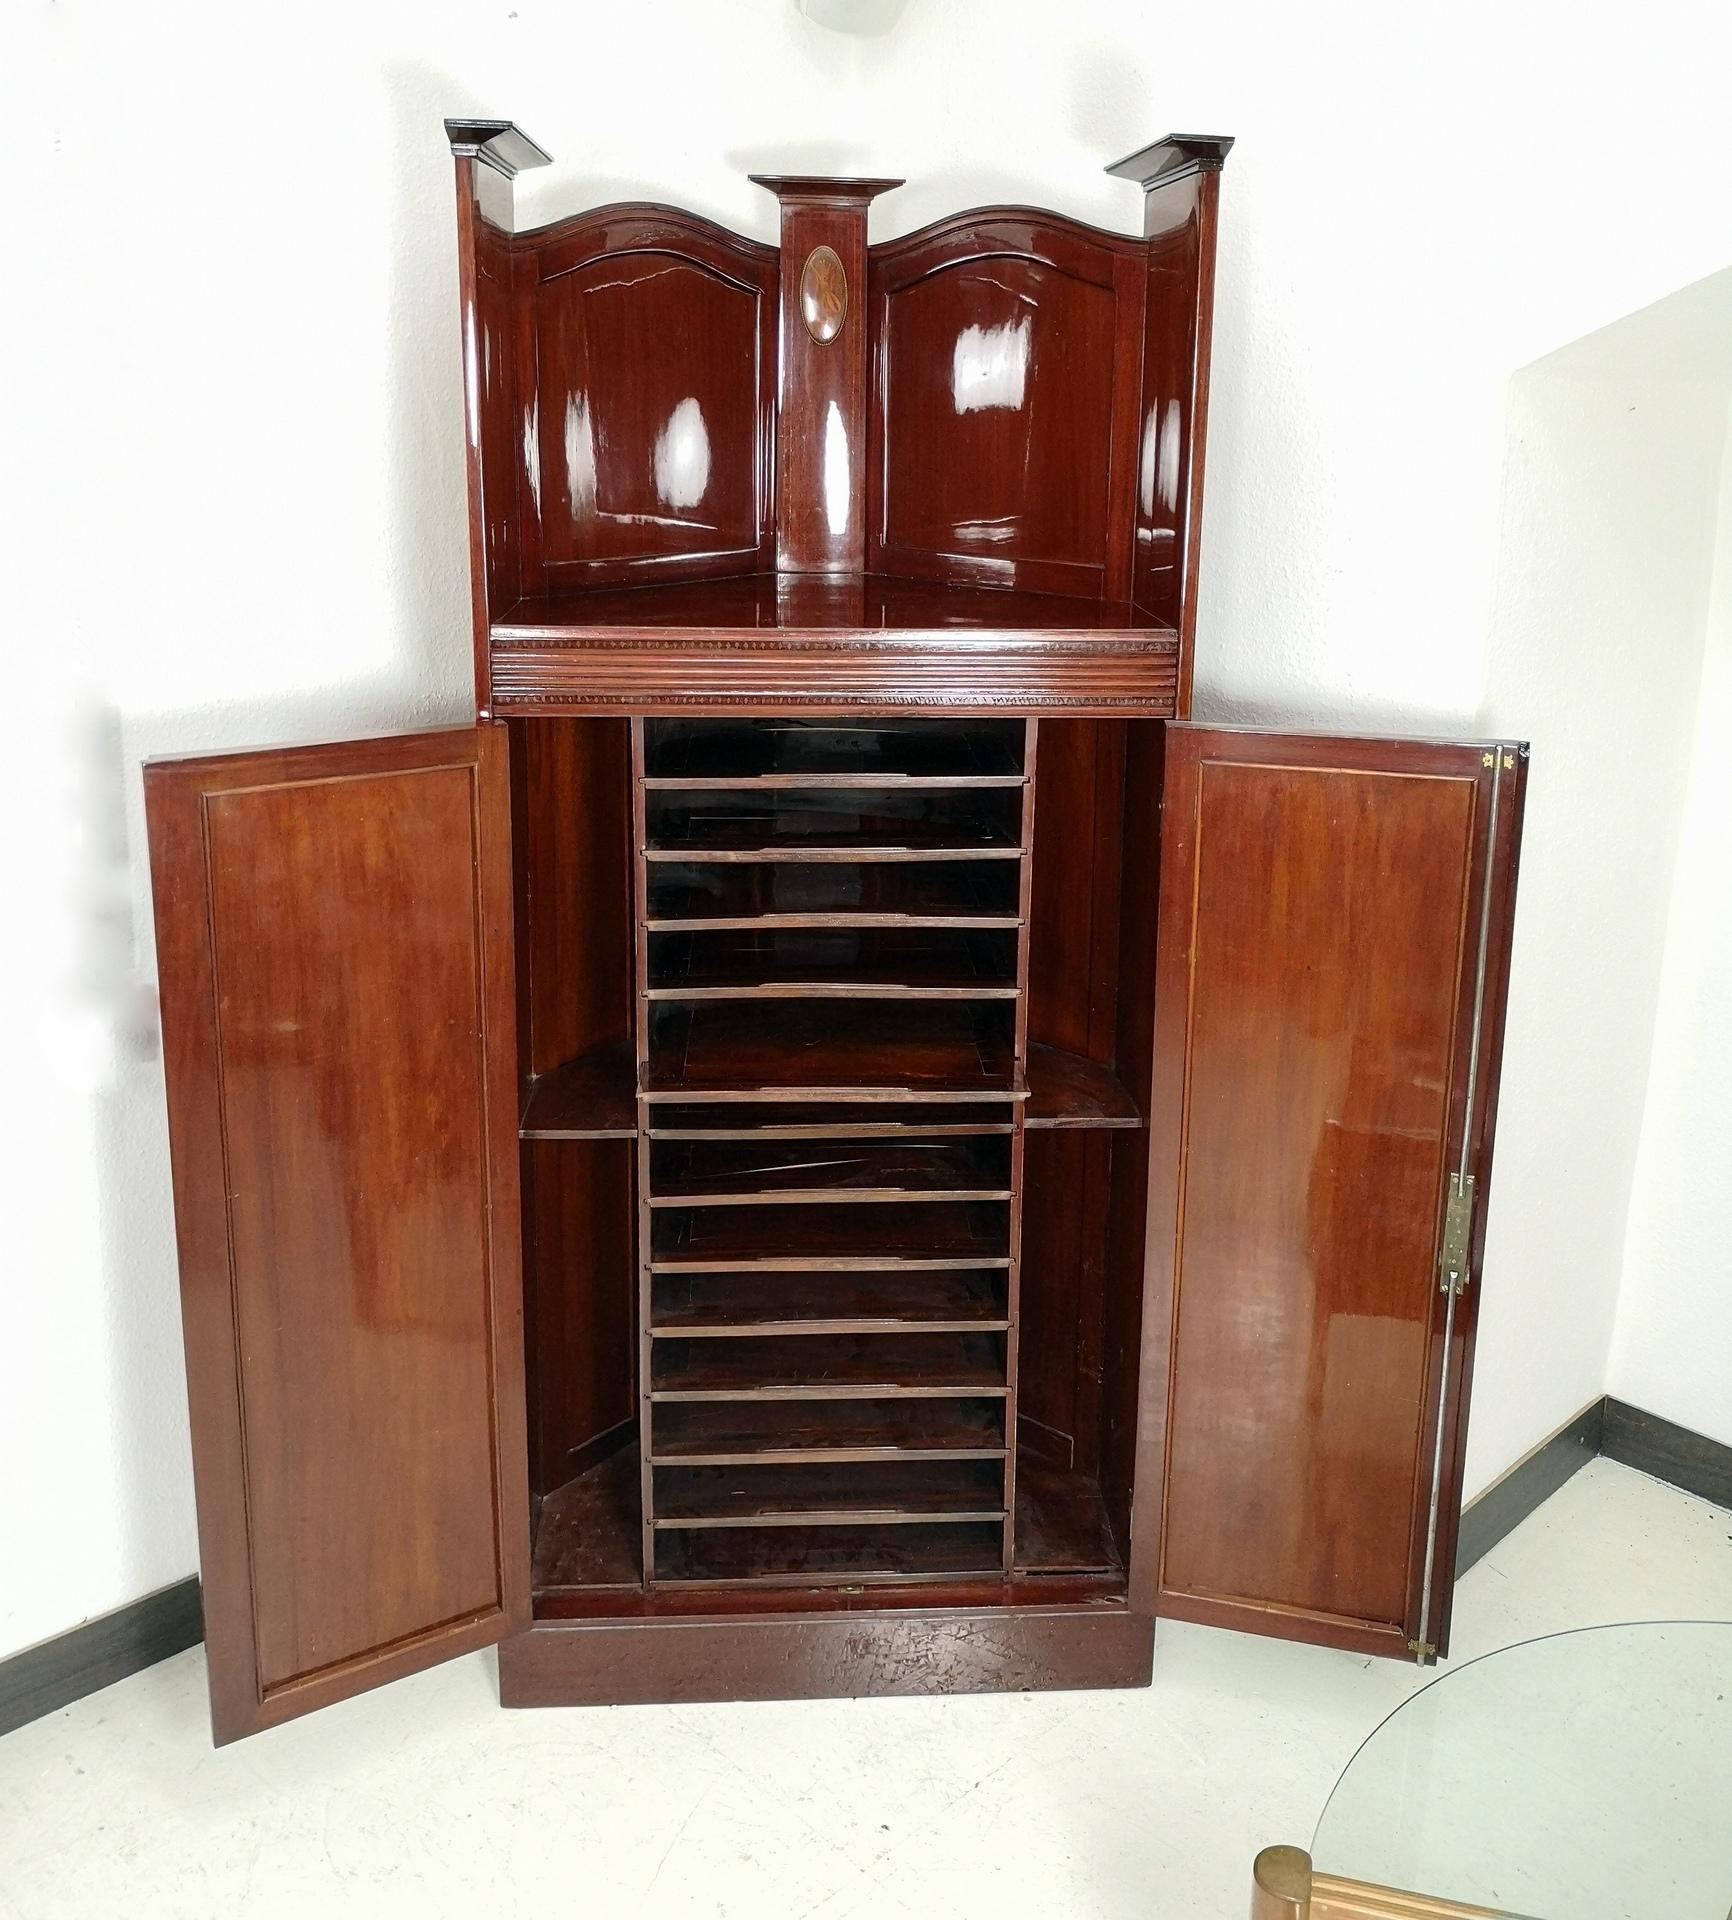 This large corner cabinet features two opening doors with twelve shelves inside. With harp and lute inlay, this turn of the century mahogany corner cabinet with inlayed intarsia has its original working lock. Fully restored, with handmade French